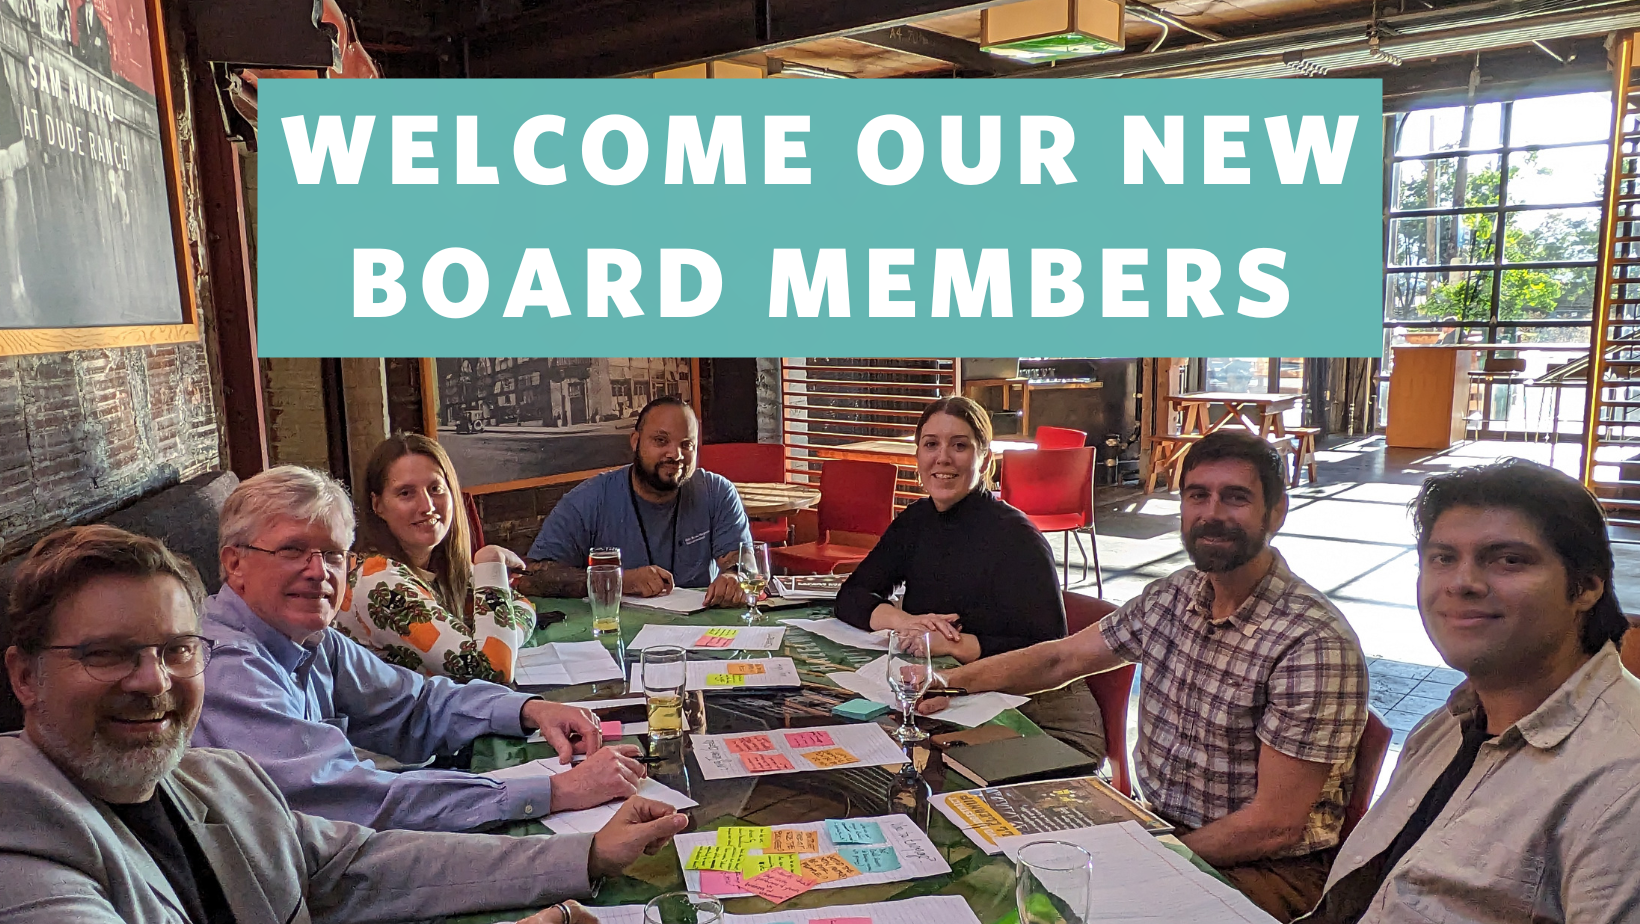 Photo of 7 people sitting at a table looking at the camera smiling with the words “welcome our our new board members” overlaying the image